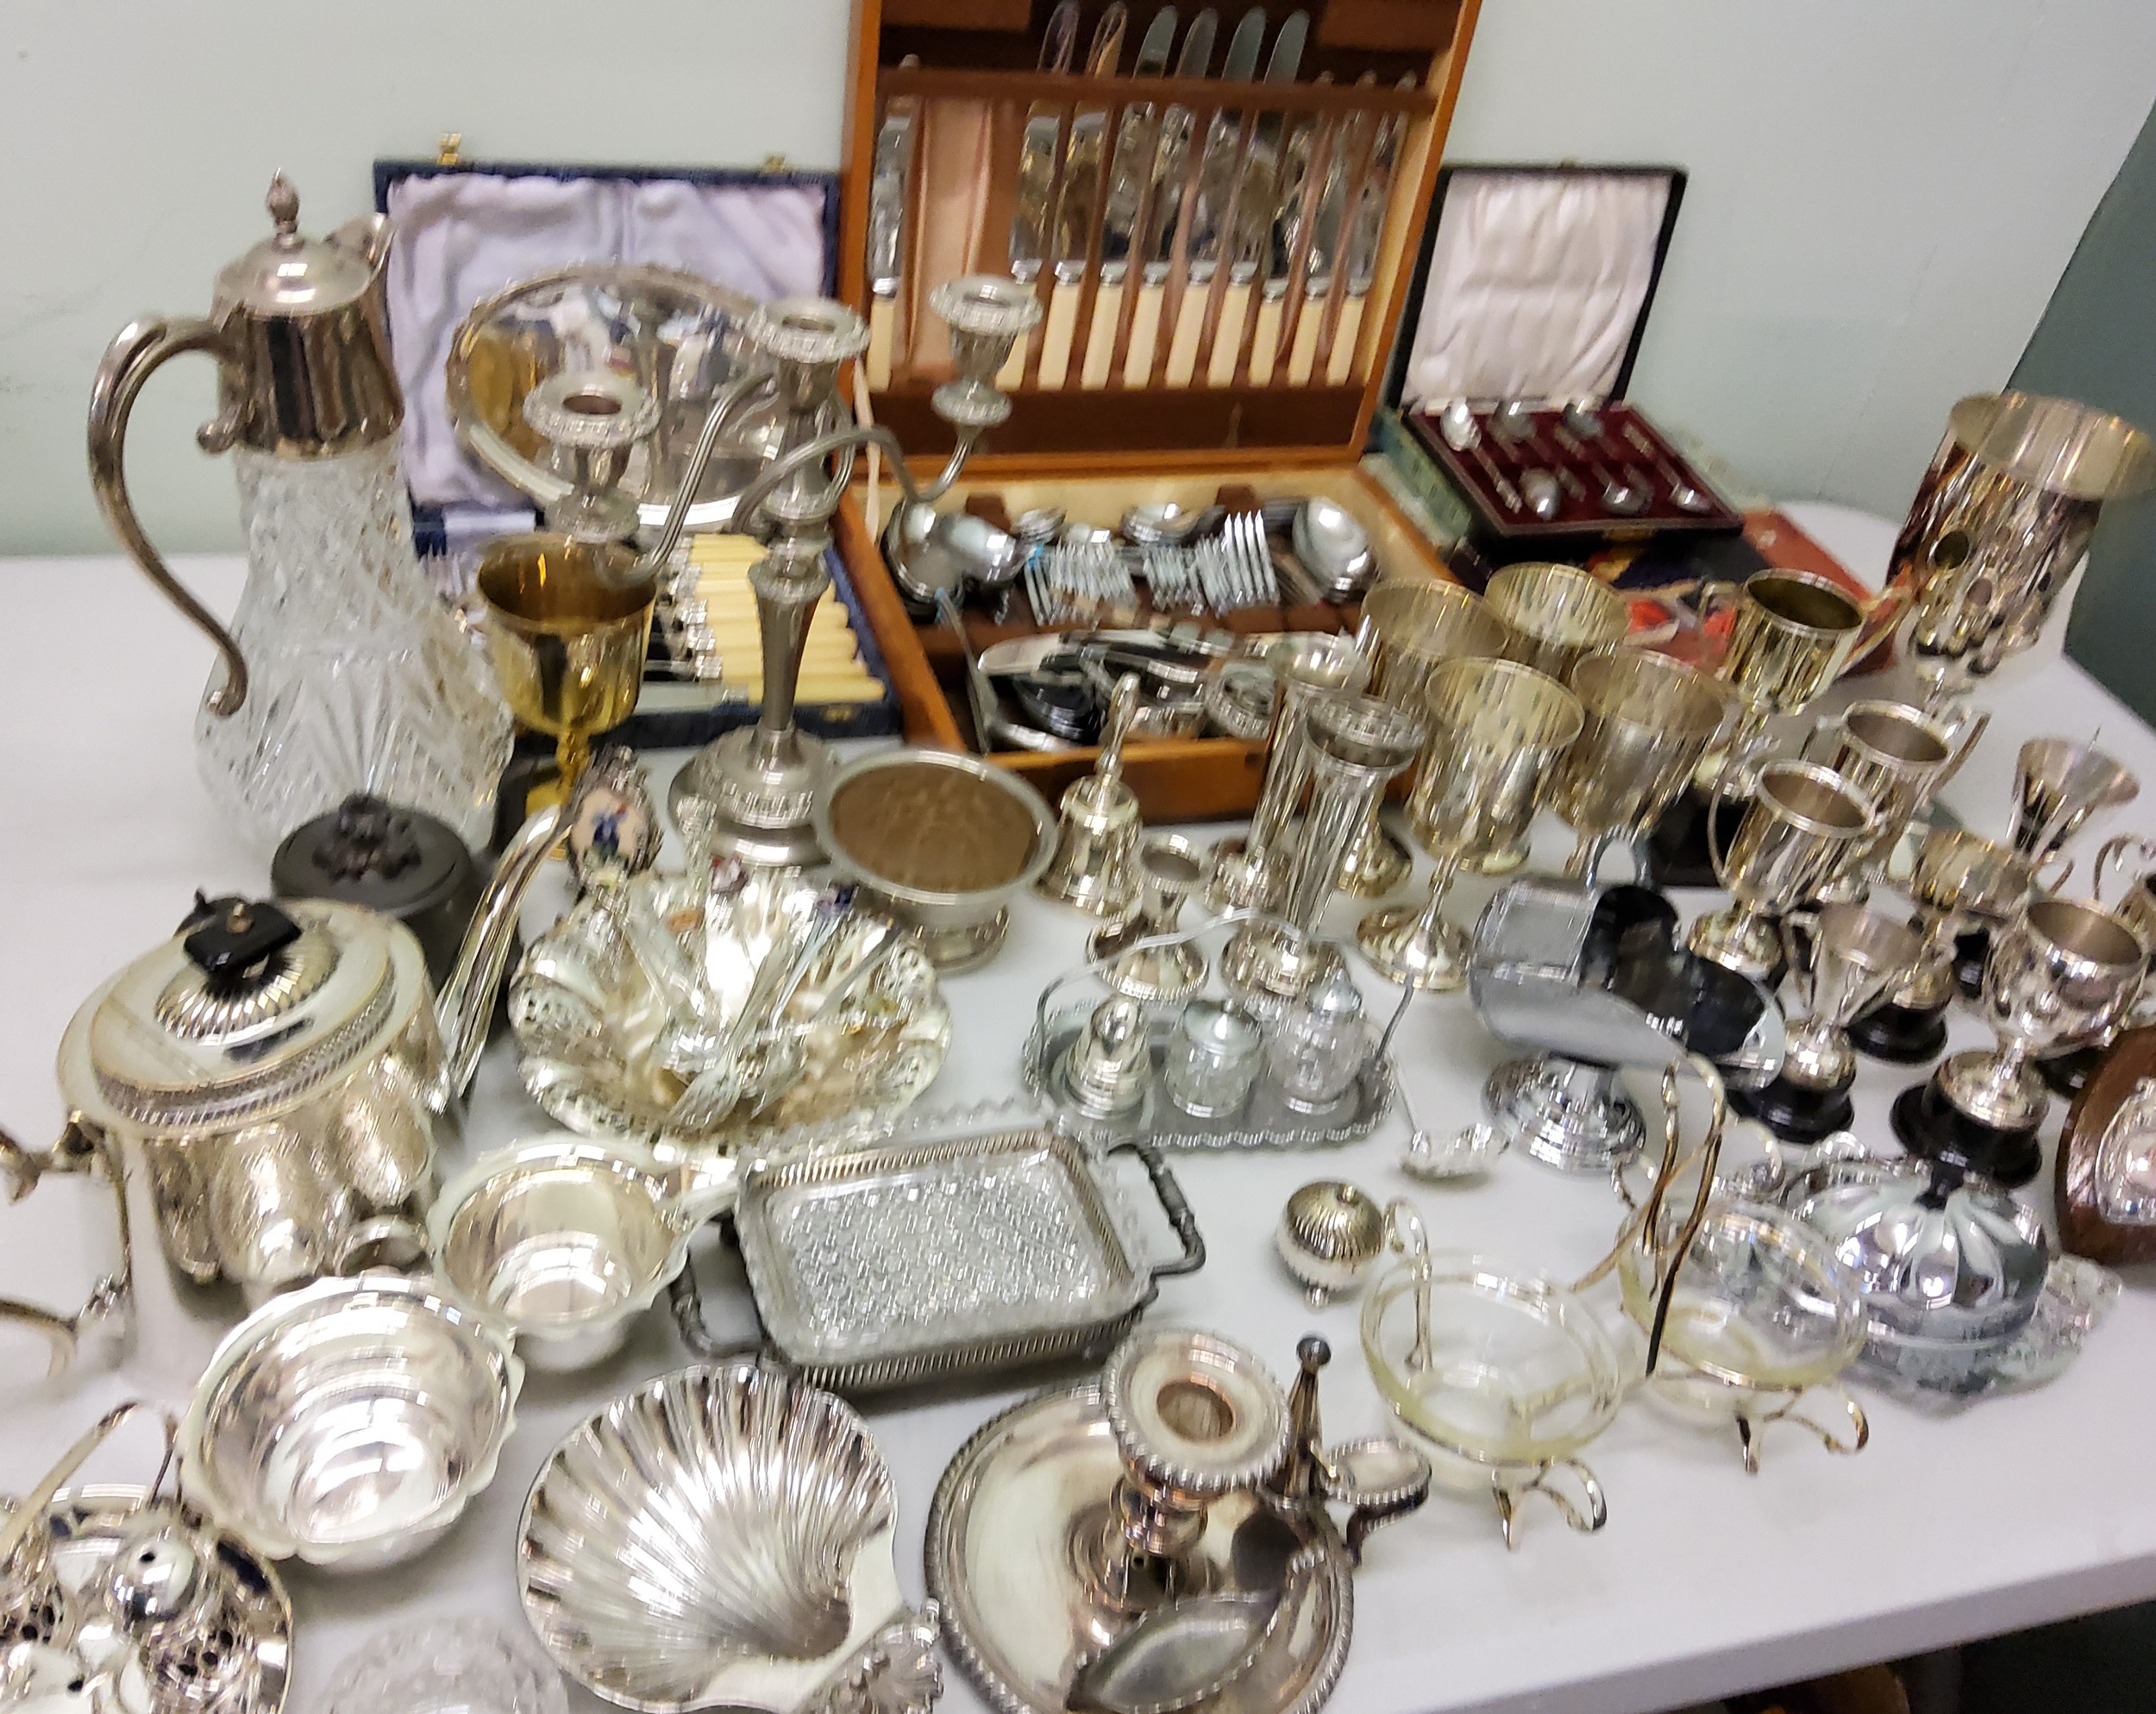 Plated Ware - trophies;  goblets;  flatware;  teapot;  claret jug;  Sheffield plated chamber stick;